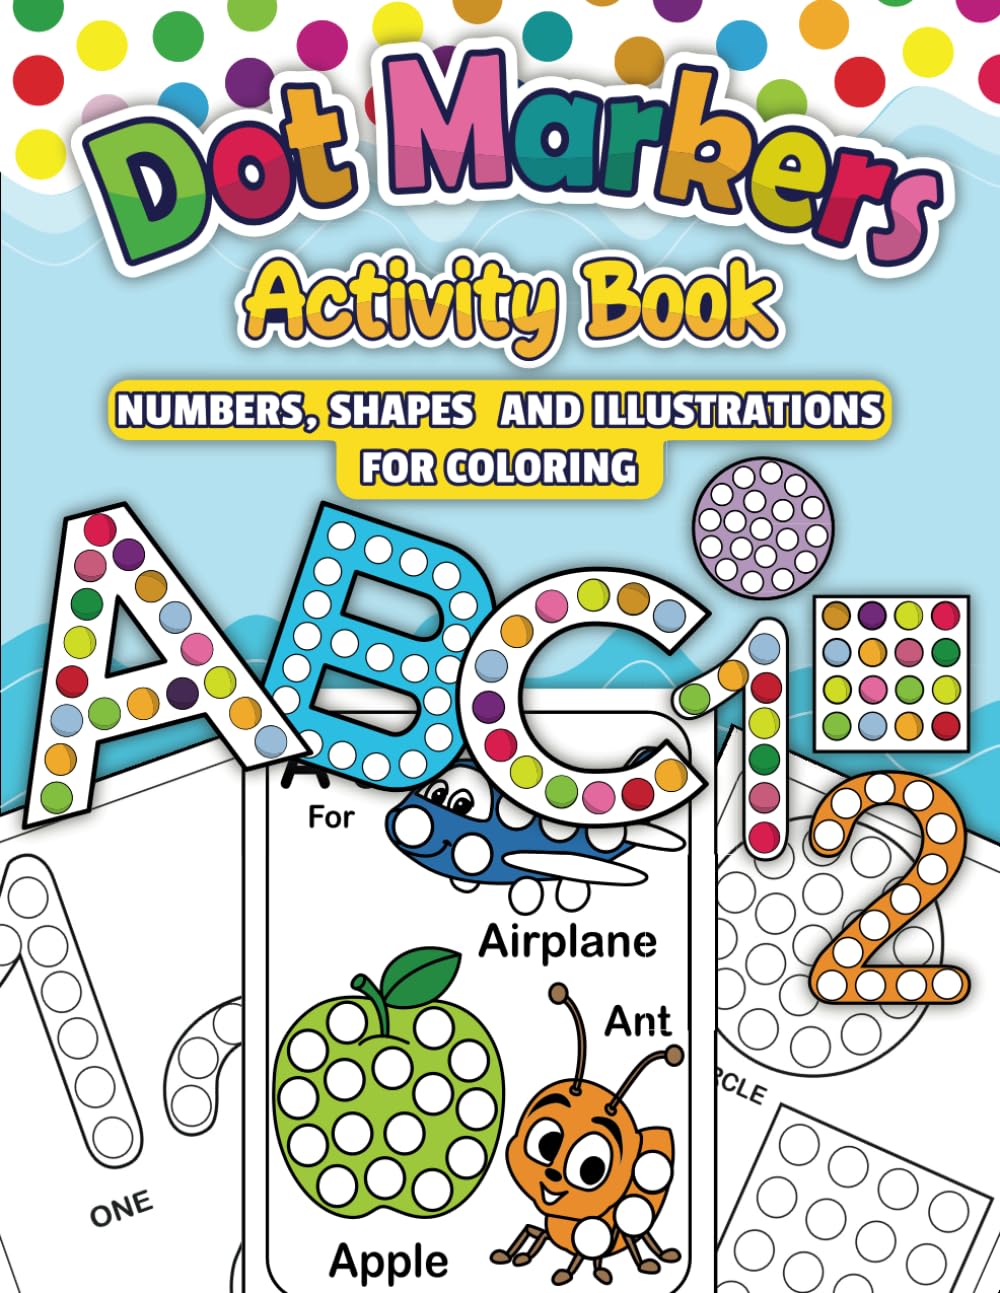 Dot Markers Activity Book ABC: Numbers, Shapes and illustrations Coloring